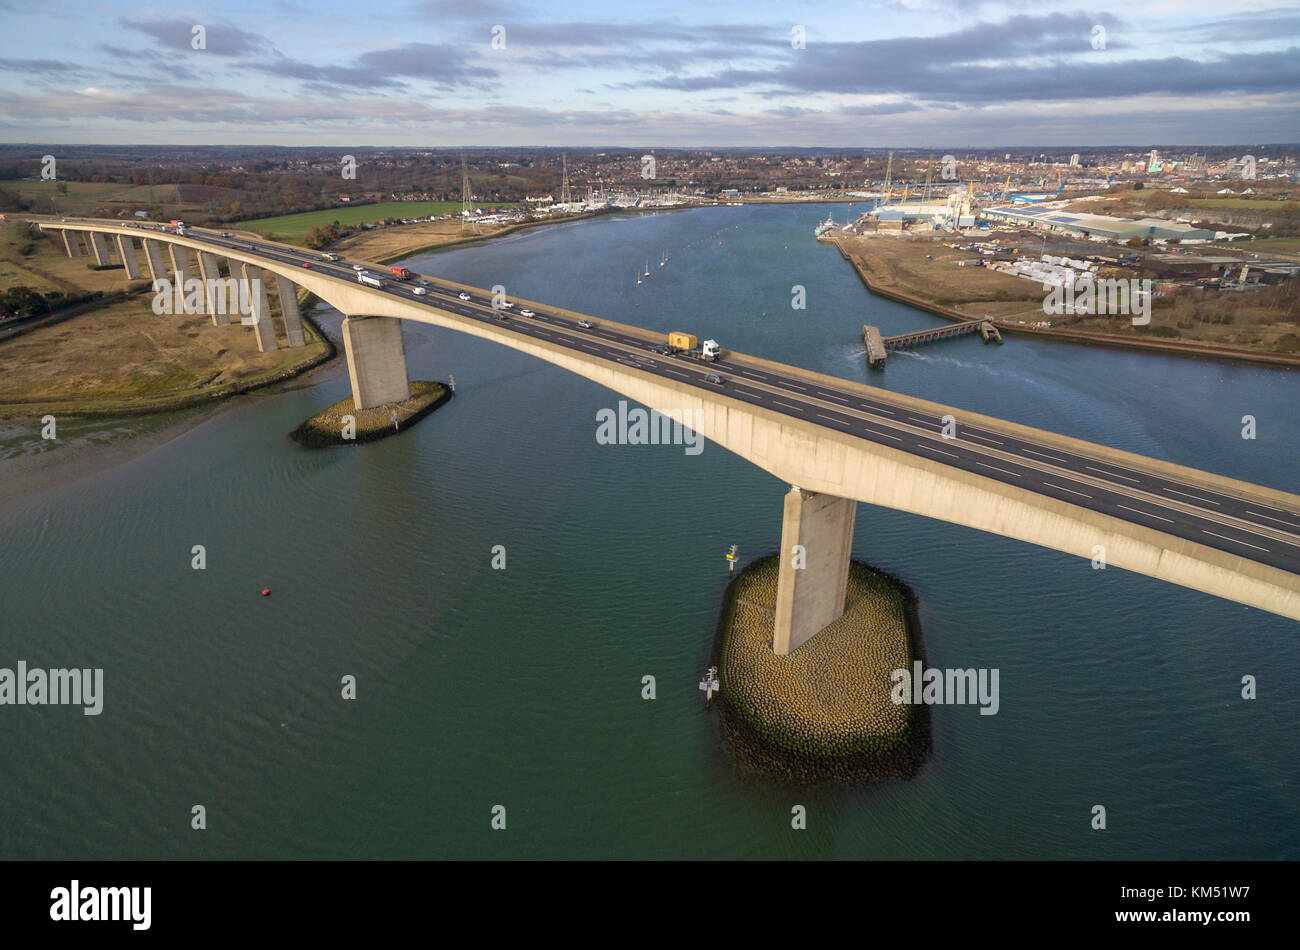 Aerial view of Bridge spanning the Orwell estuary in Ipswich, Suffolk, UK Stock Photo